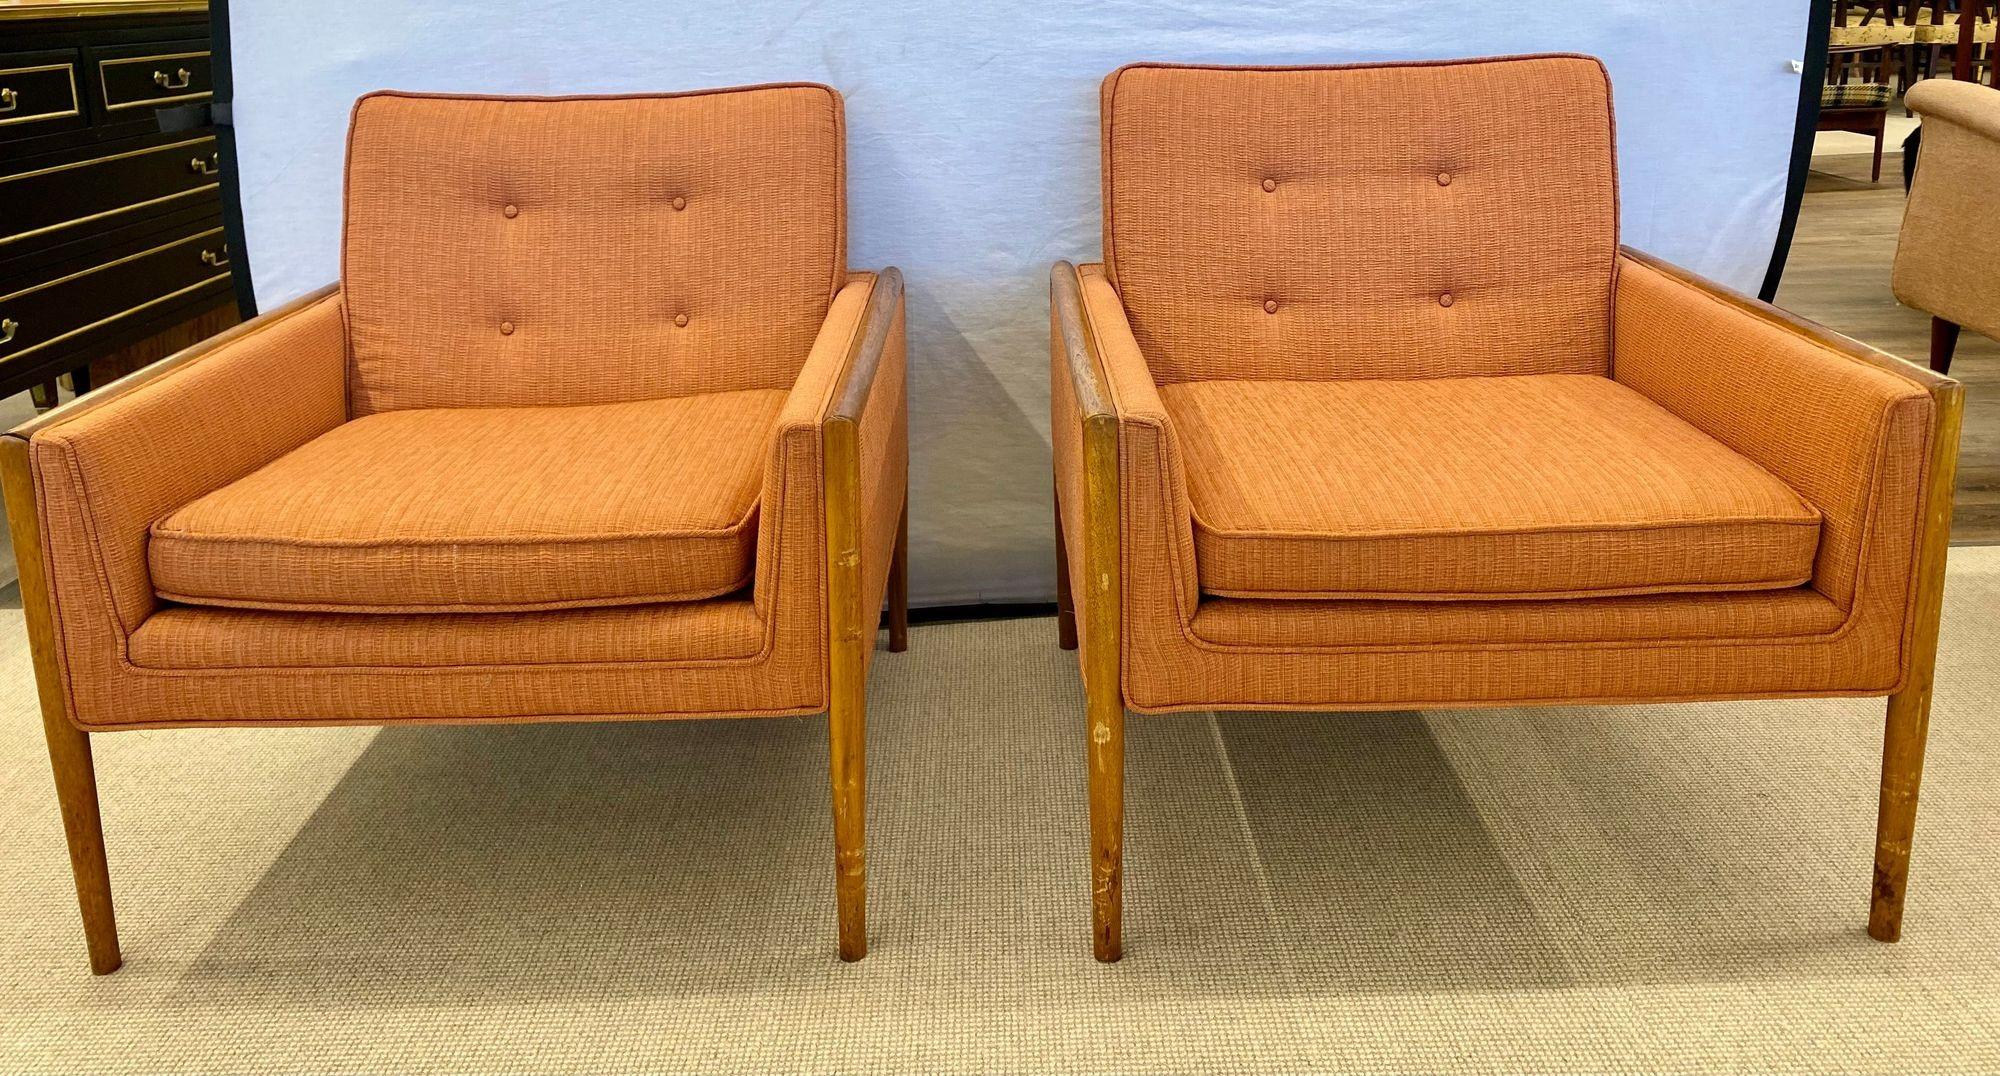 Pair of Mid-Century Modern Lounge Chairs, American, Walnut, 1960s For Sale 2